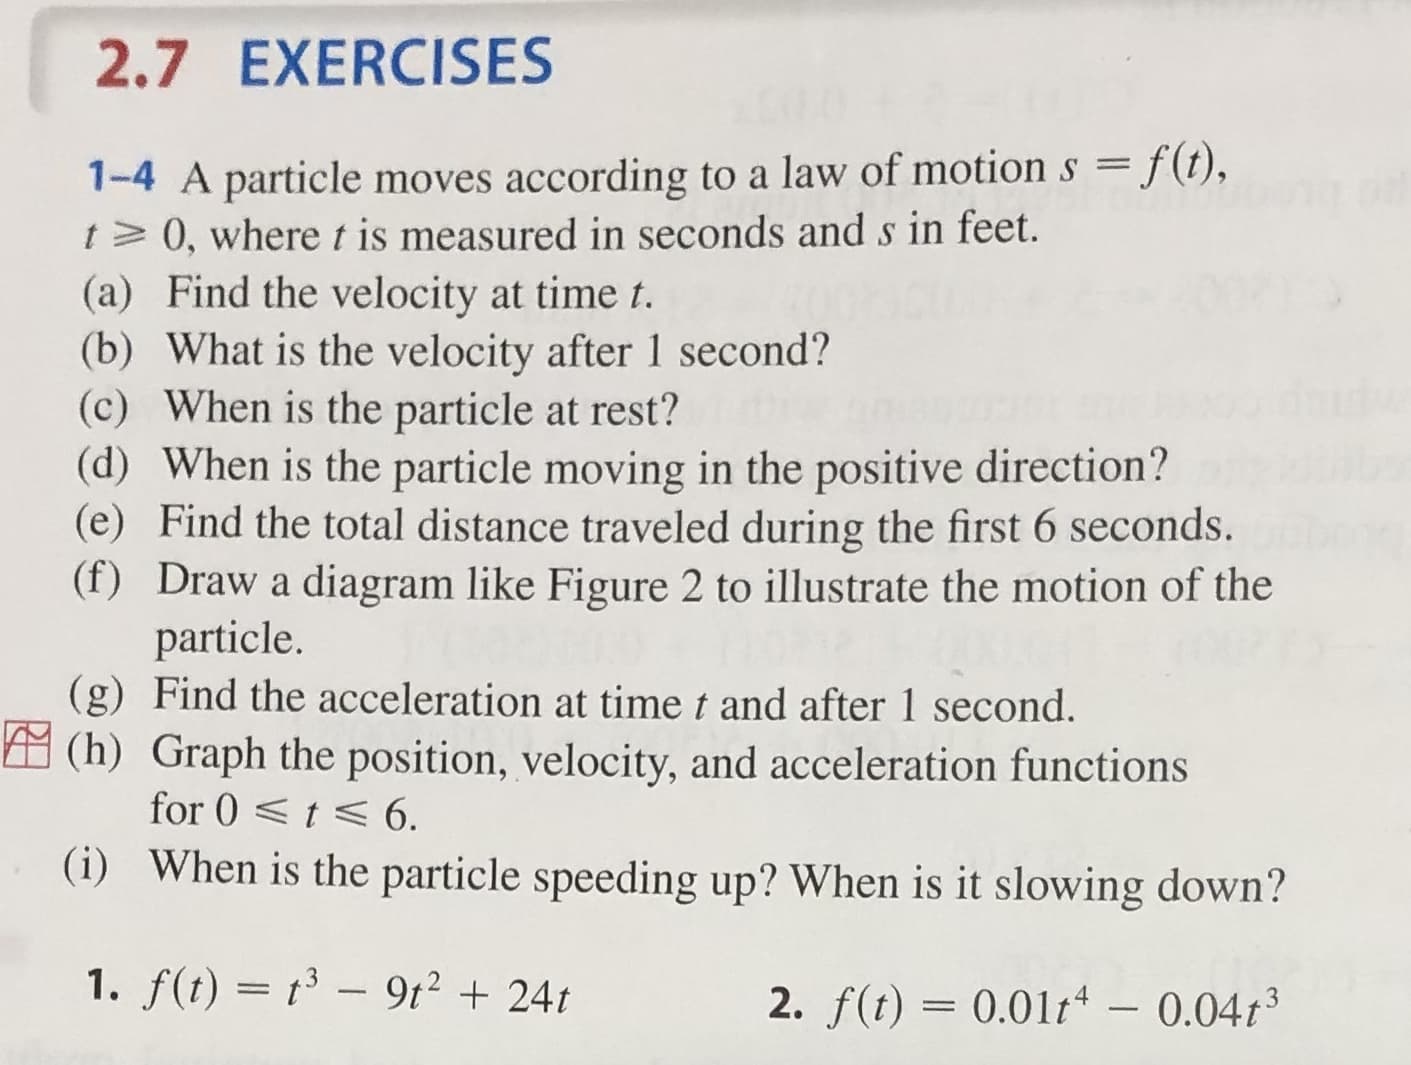 2.7 EXERCISES
1-4 A particle moves according to a law of motion s f(t),
t 0, where t is measured in seconds ands in feet.
(a) Find the velocity at time t.
(b) What is the velocity after 1 second?
(c) When is the particle at rest?
(d) When is the particle moving in the positive direction?
(e) Find the total distance traveled during the first 6 seconds.
(f) Draw a diagram like Figure 2 to illustrate the motion of the
particle.
(g) Find the acceleration at time t and after 1 second.
(h) Graph the position, velocity, and acceleration functions
for 0t 6.
(i) When is the particle speeding up? When is it slowing down?
1. f(t) t3-9t224t
2. f(t) 0.01t - 0.04t3
